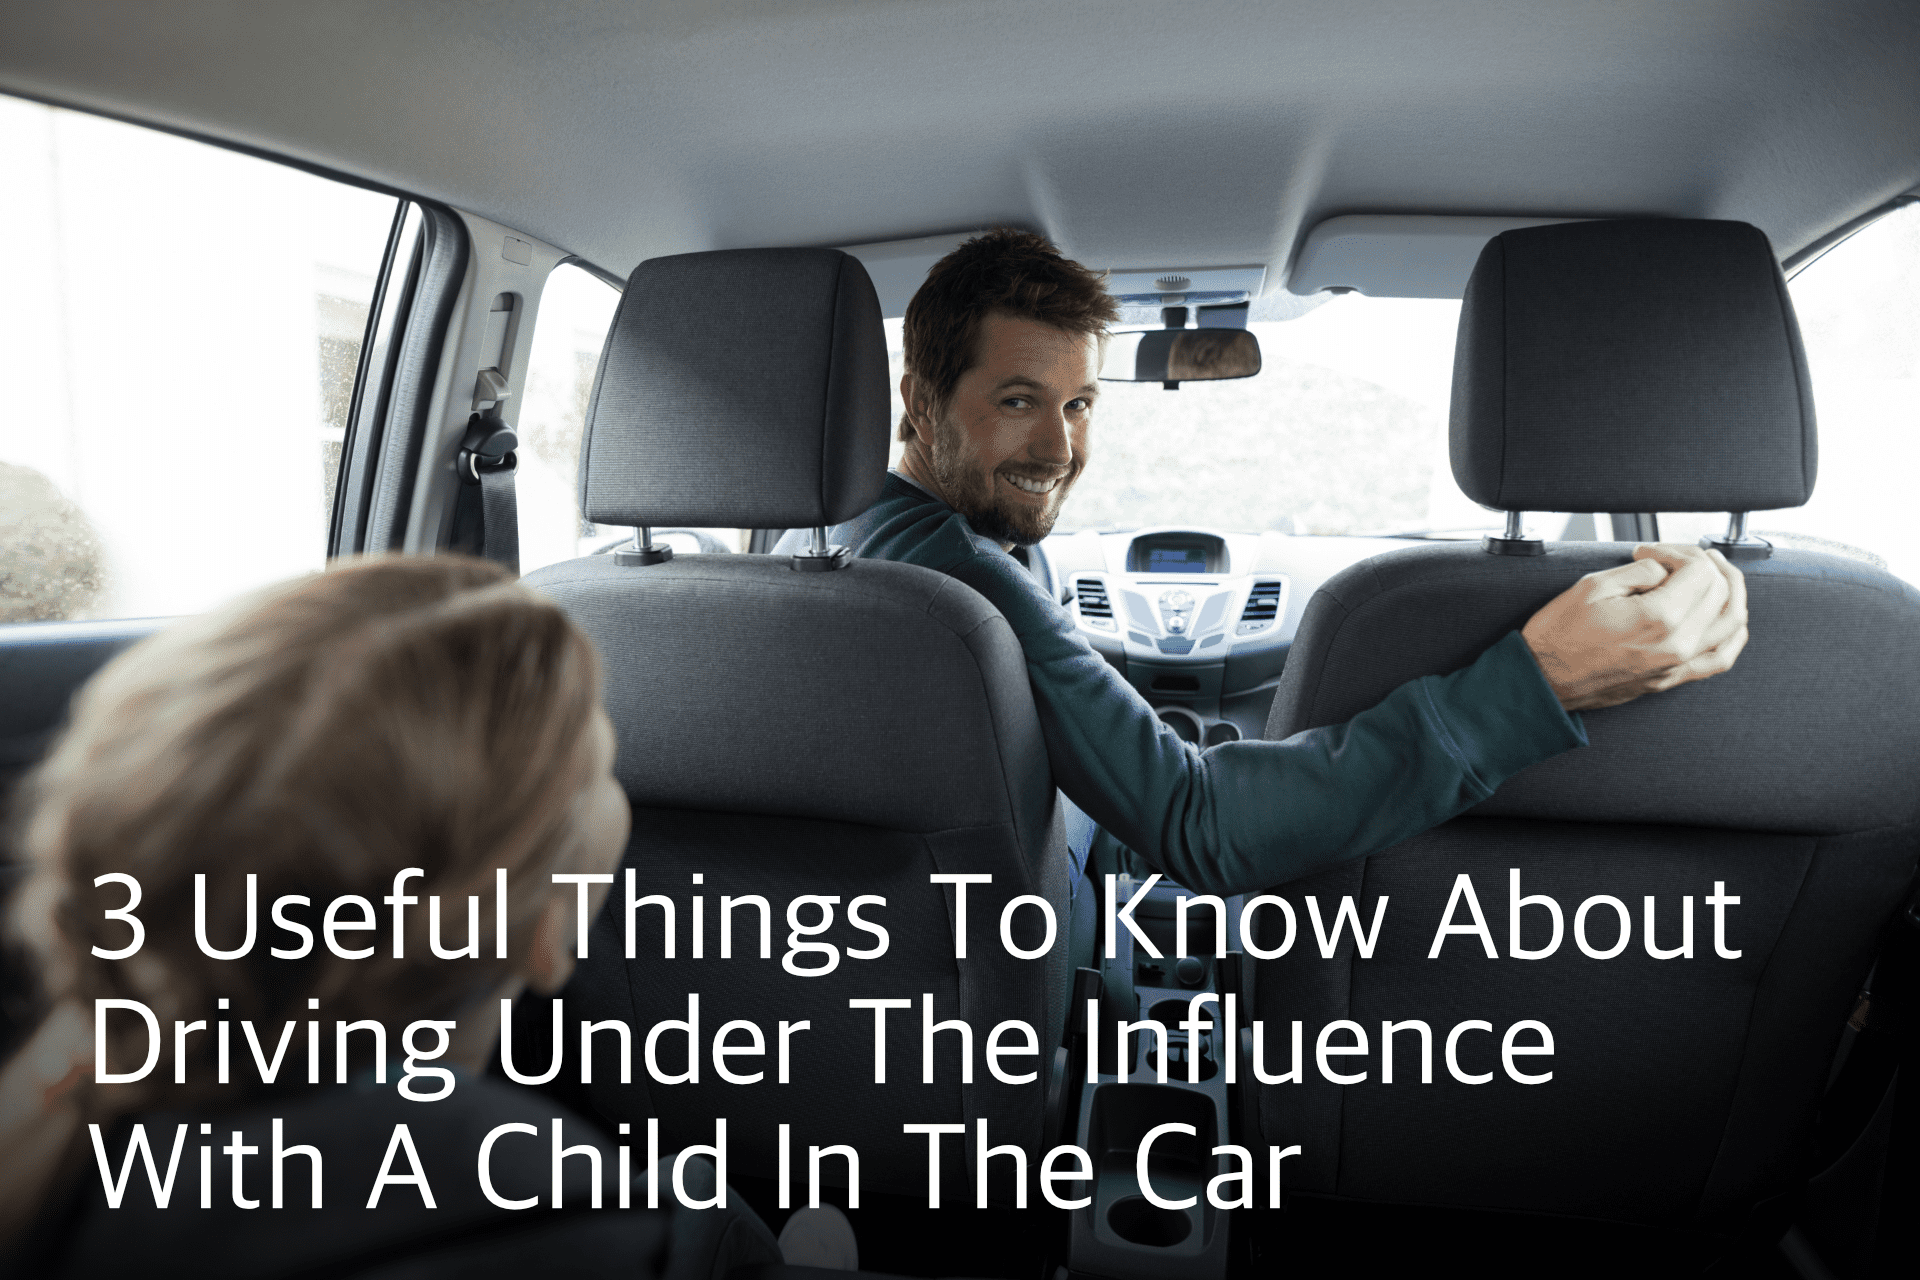 driving under the influence, with a child